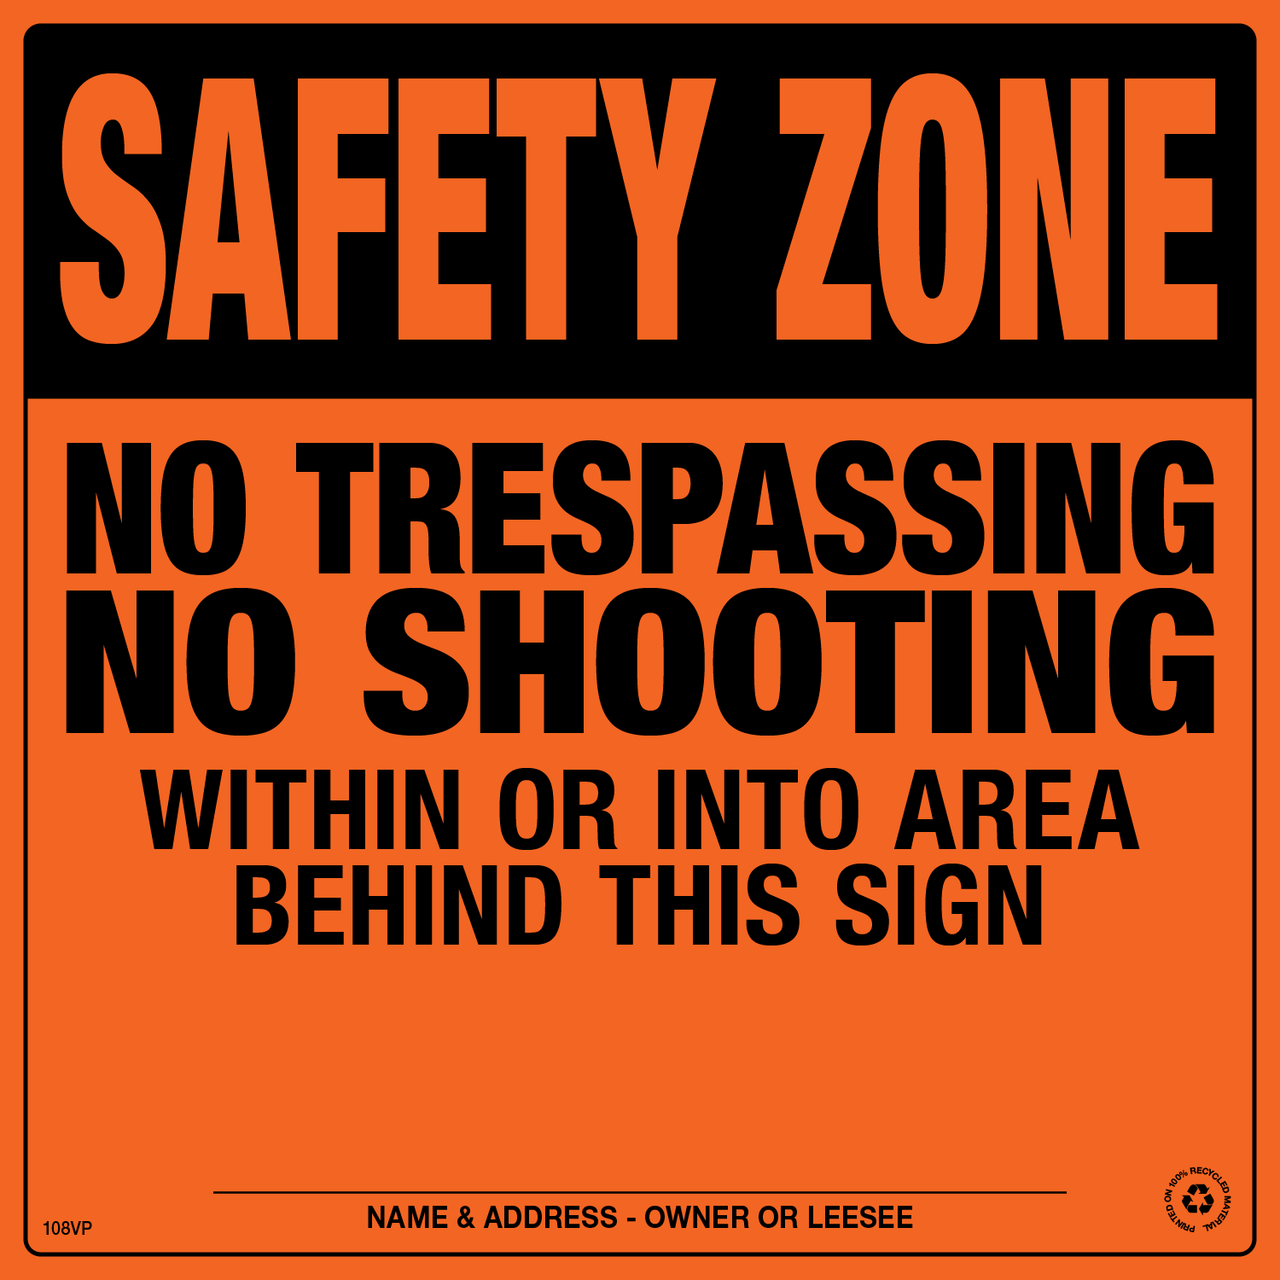 Safety Zone/No Trespassing/No Shooting Posted Sign - Orange Aluminum -  Pack of 25